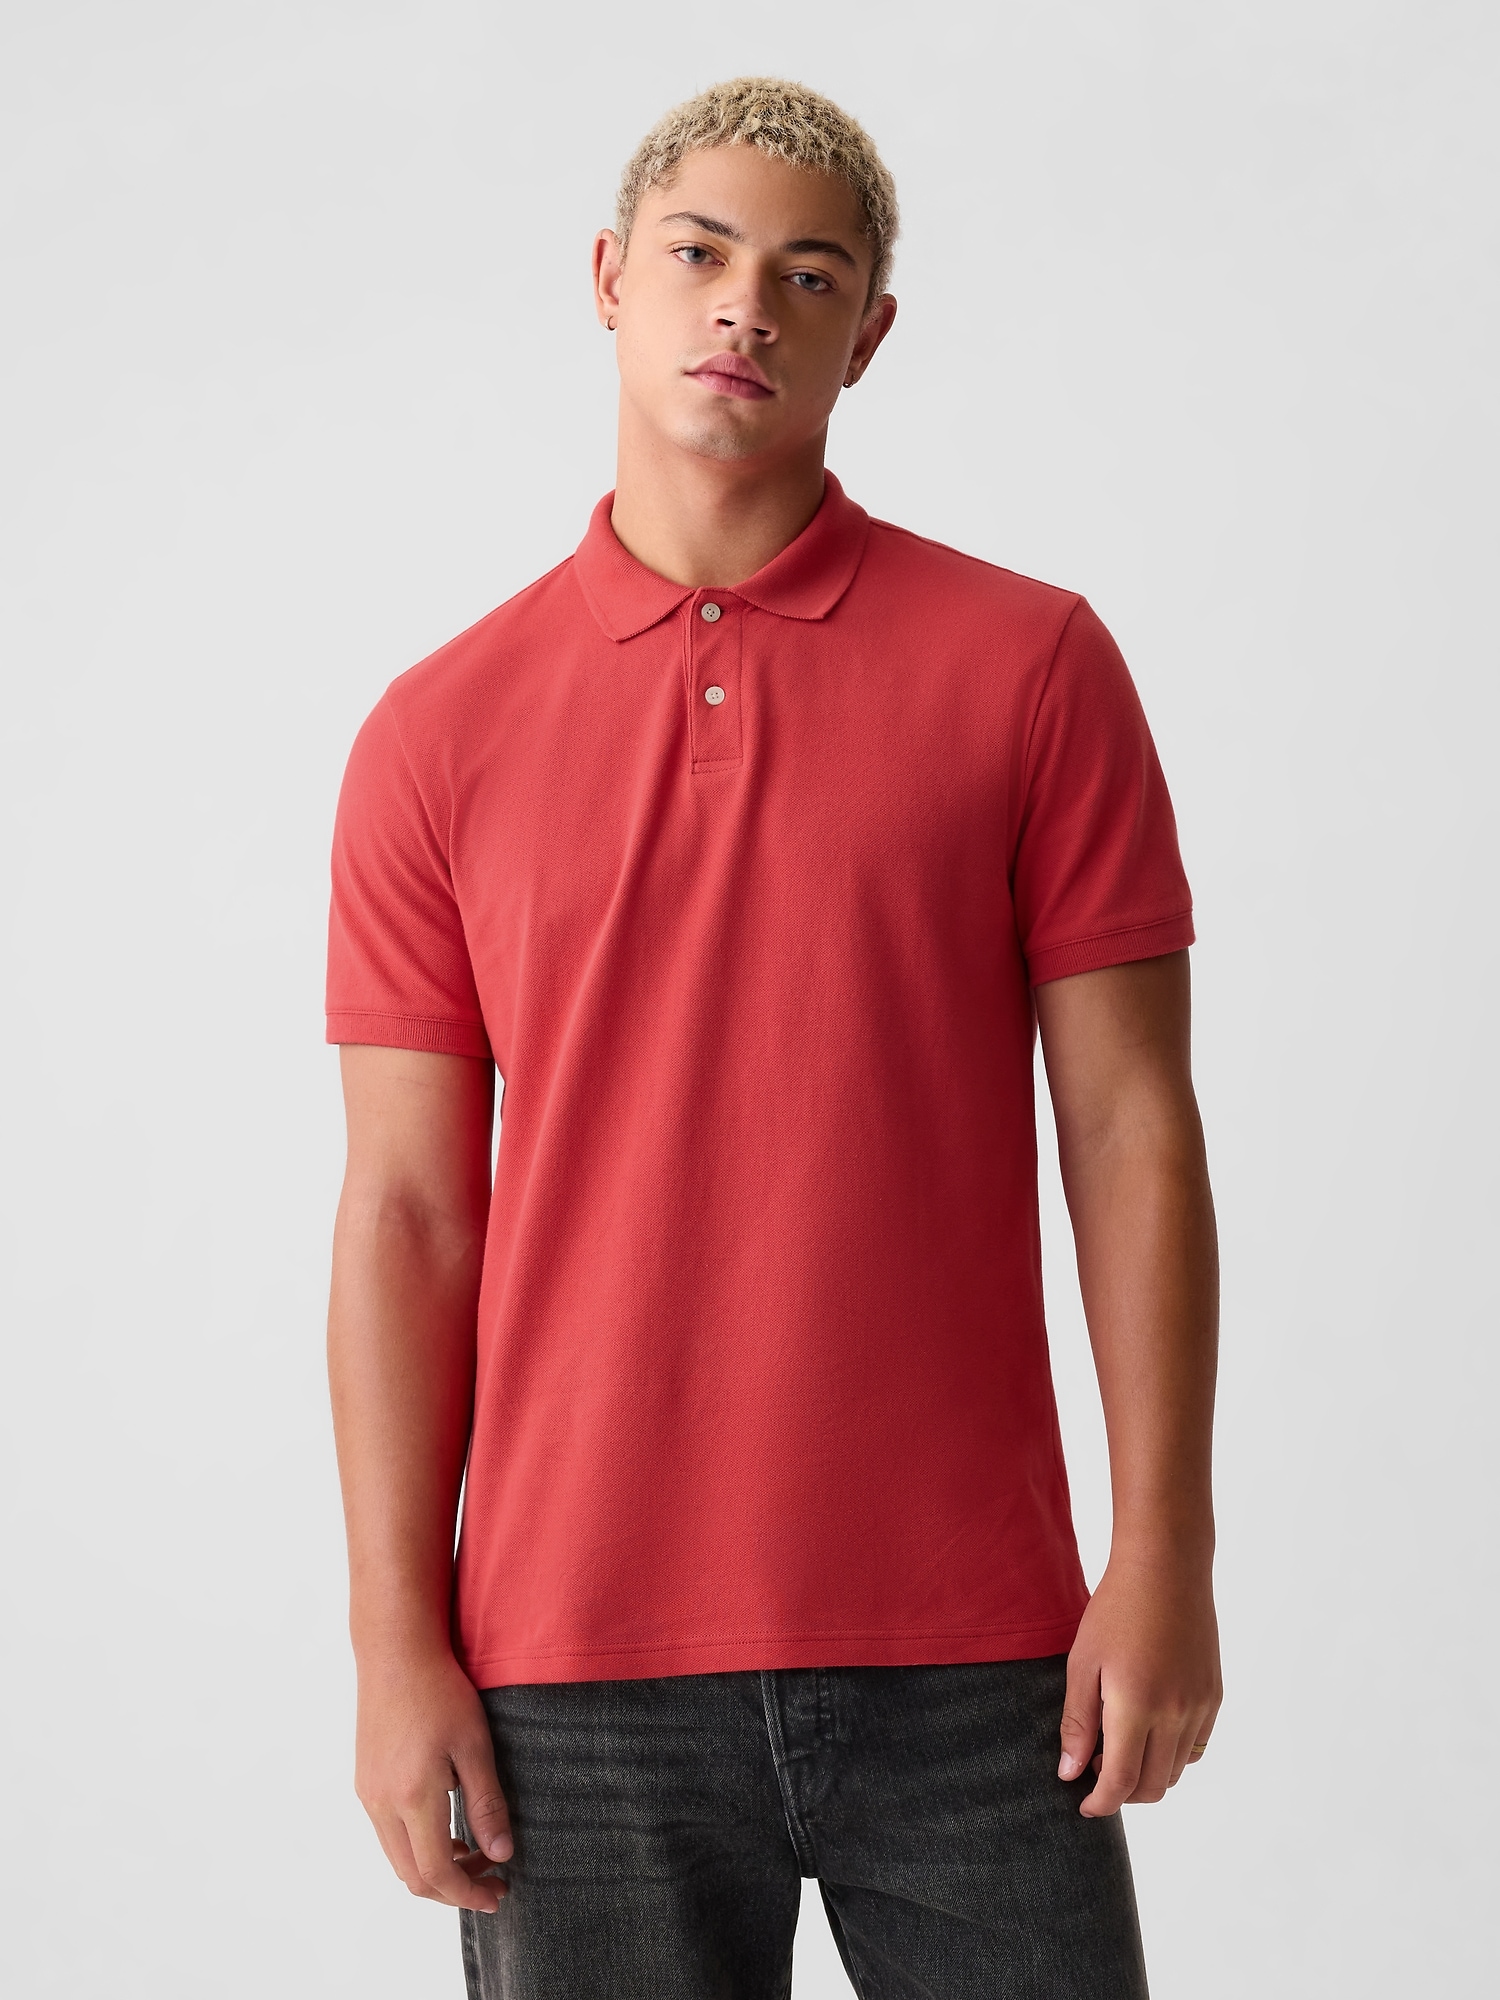 Gap Pique Polo Shirt Shirt In Weathered Red V2